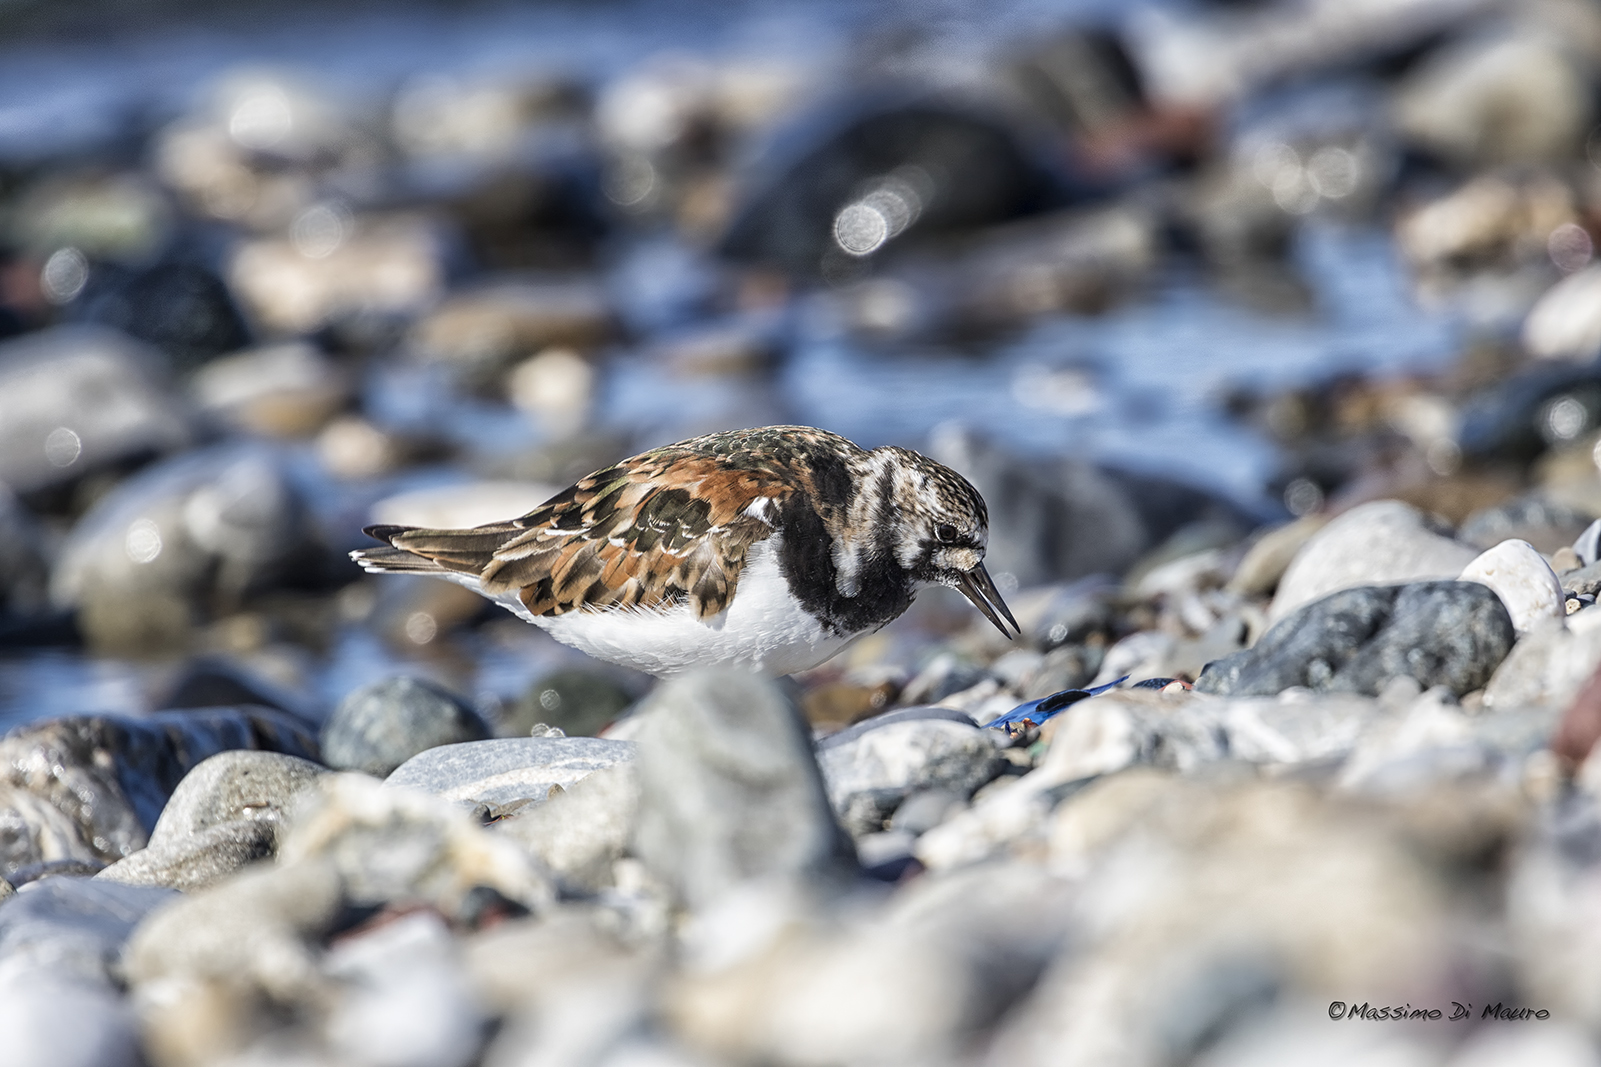 the usual Turnstone...